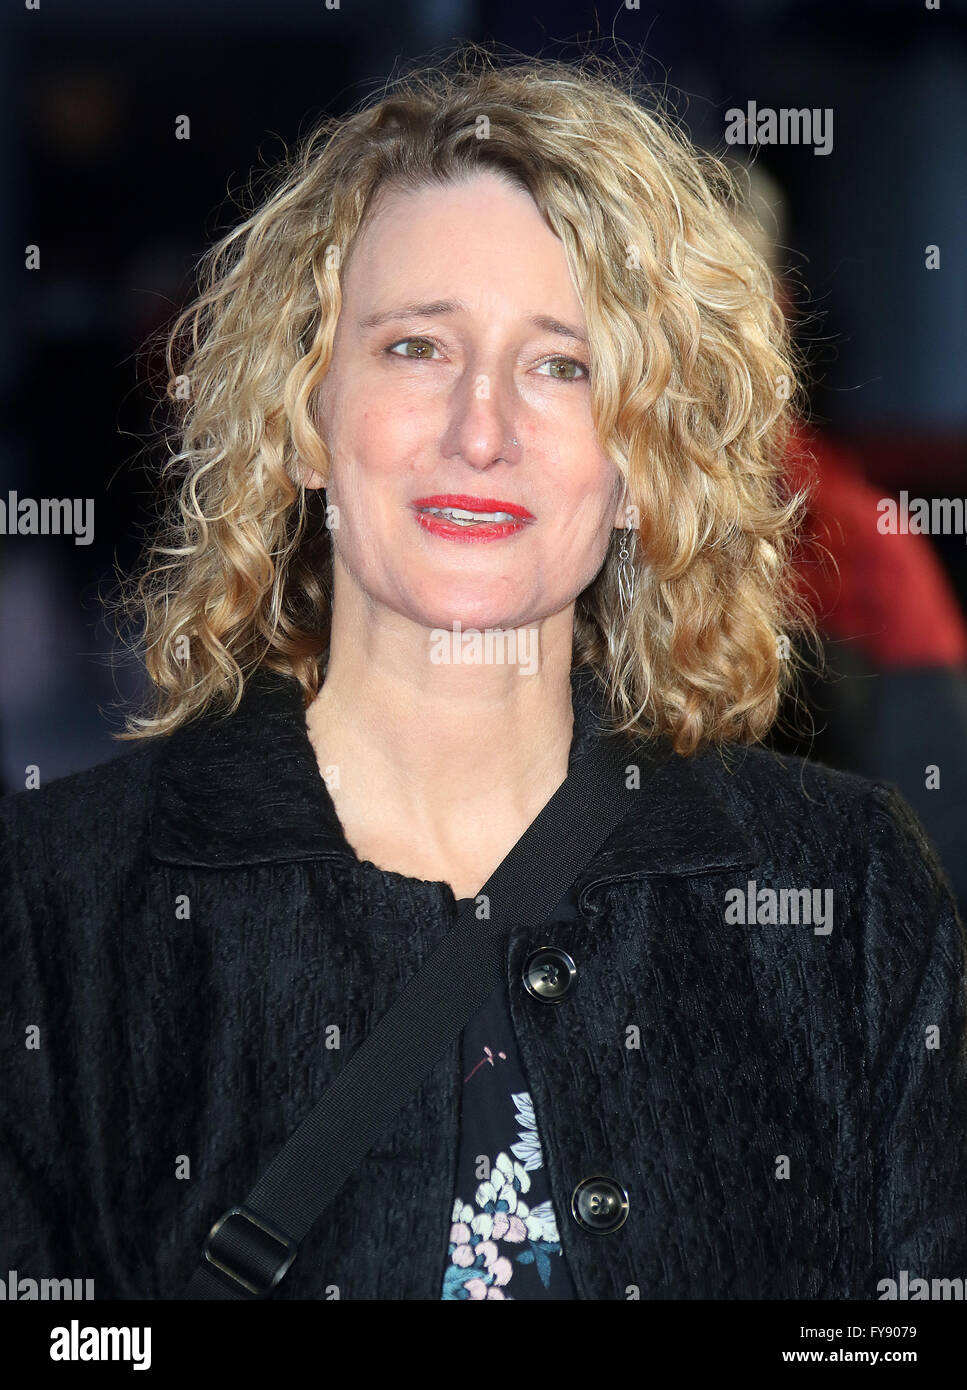 March 15, 2016 - Tricia Tuttle attending 'The Pass' UK Premiere at Odeon, Leicester Square in London, UK. Stock Photo